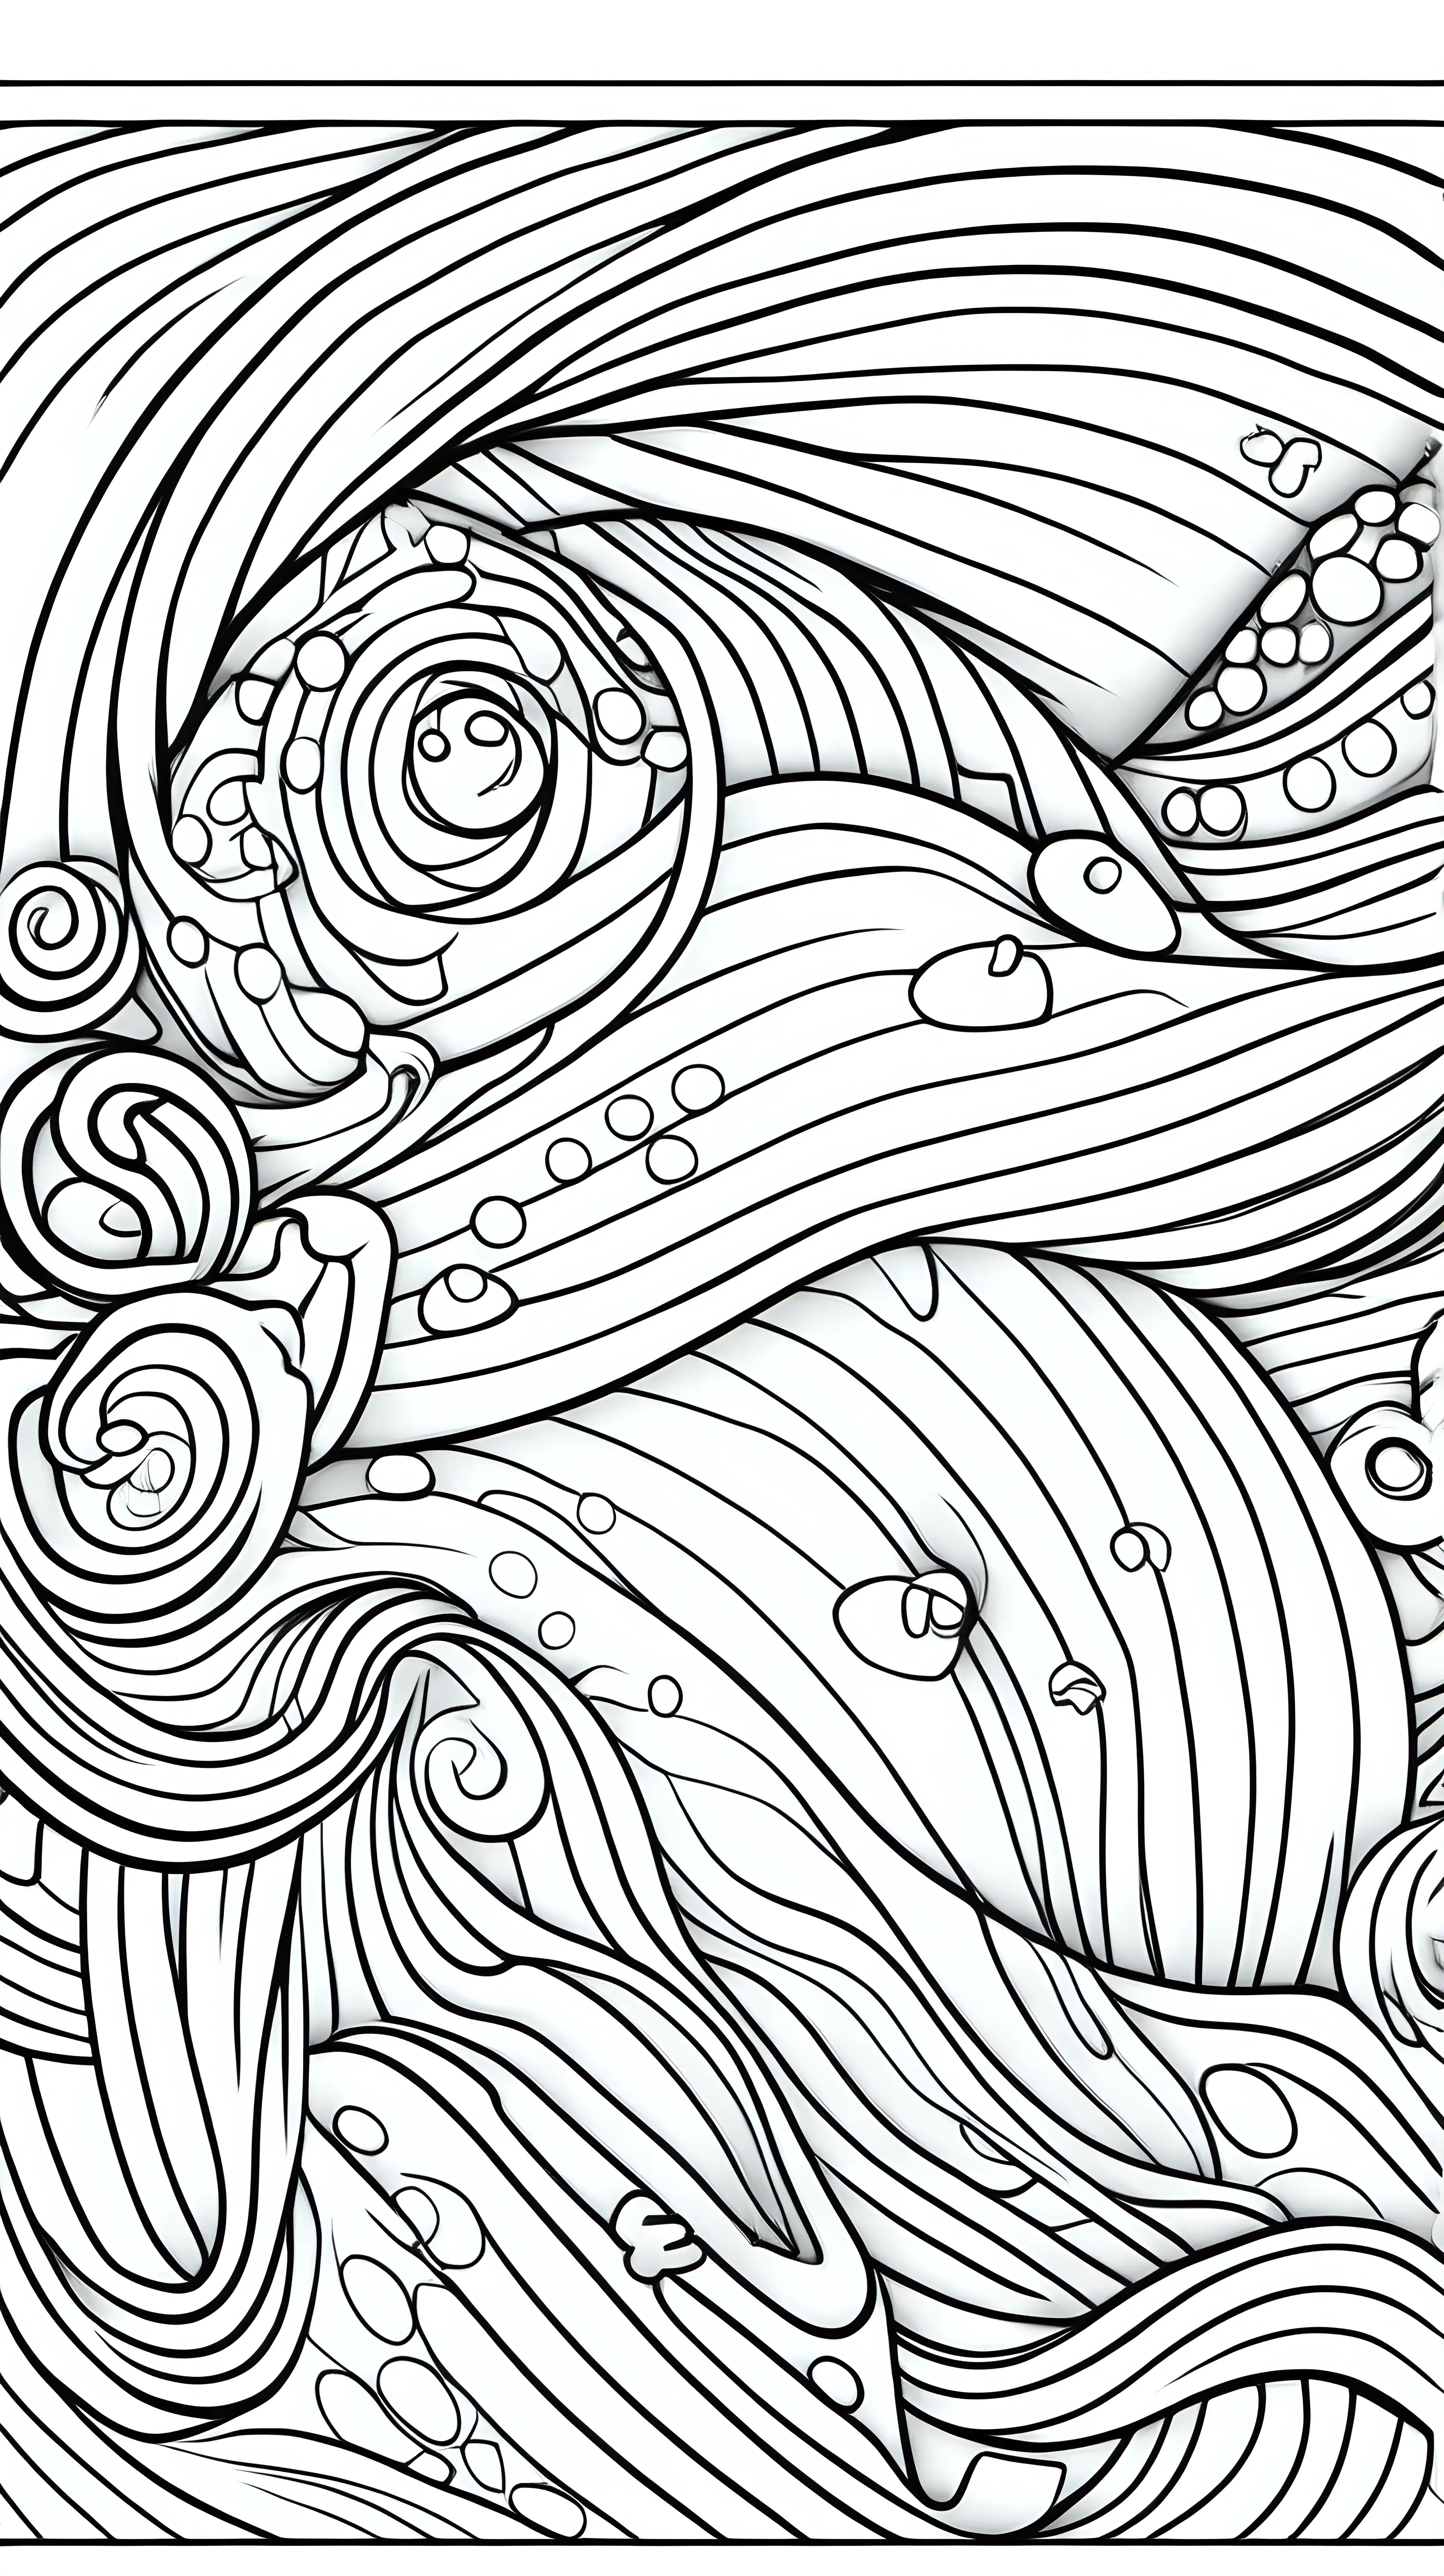 Simple and Engaging Kids Coloring Page with Basic Patterns